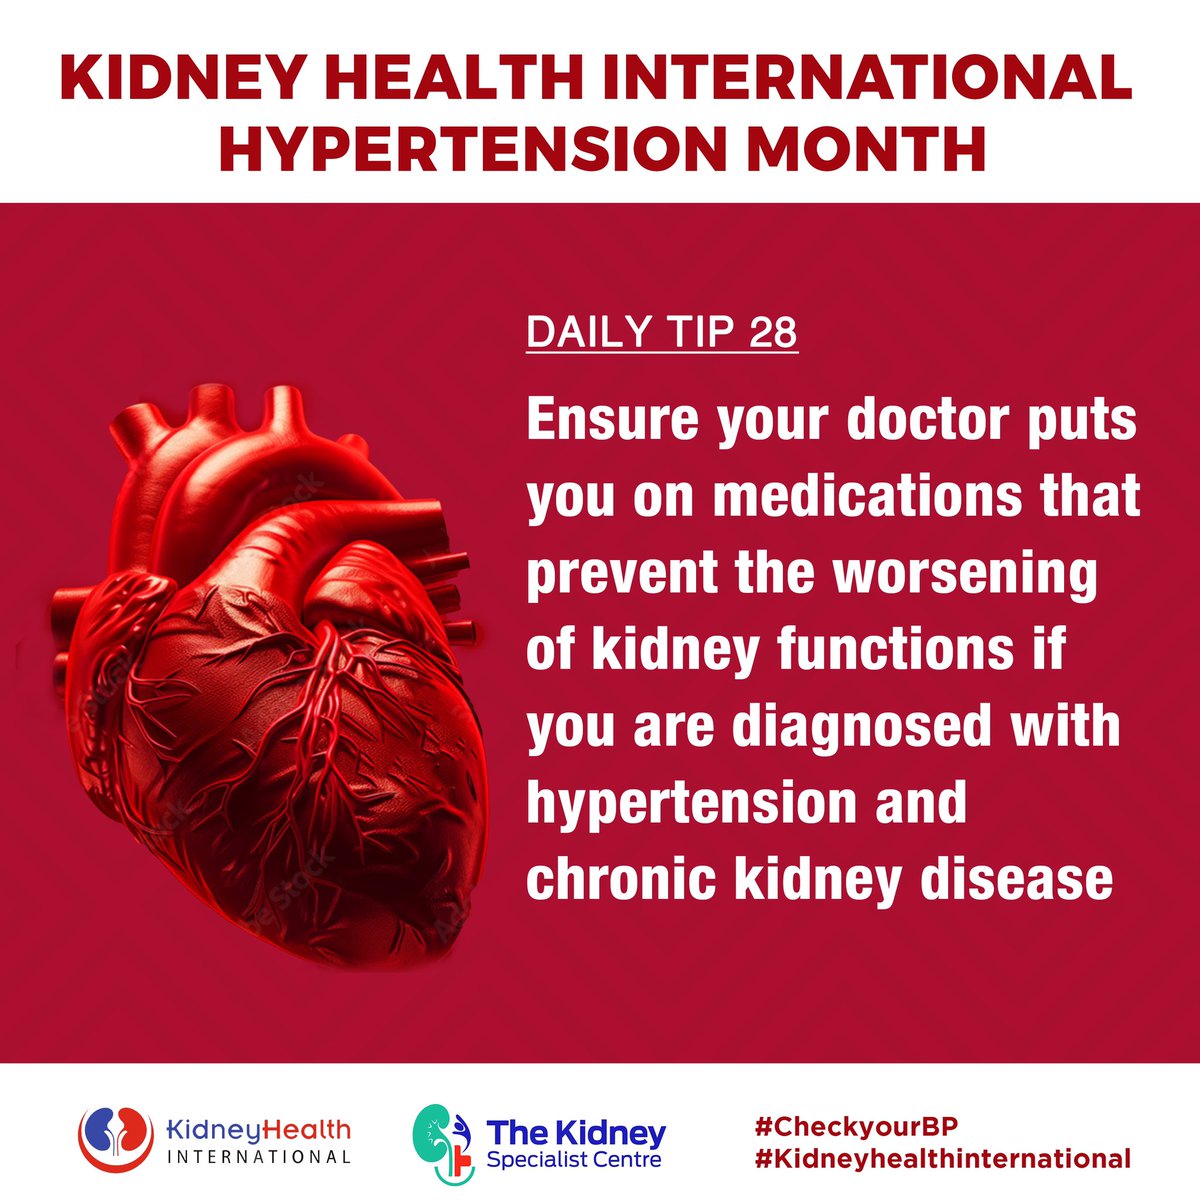 The moment you are diagnosed with hypertension, your doctors should check your kidney function. If you have both hypertension and kidney disease, ensure you are referred to see a kidney specialist and you will be put on medications that prevent worsening of your kidney function.